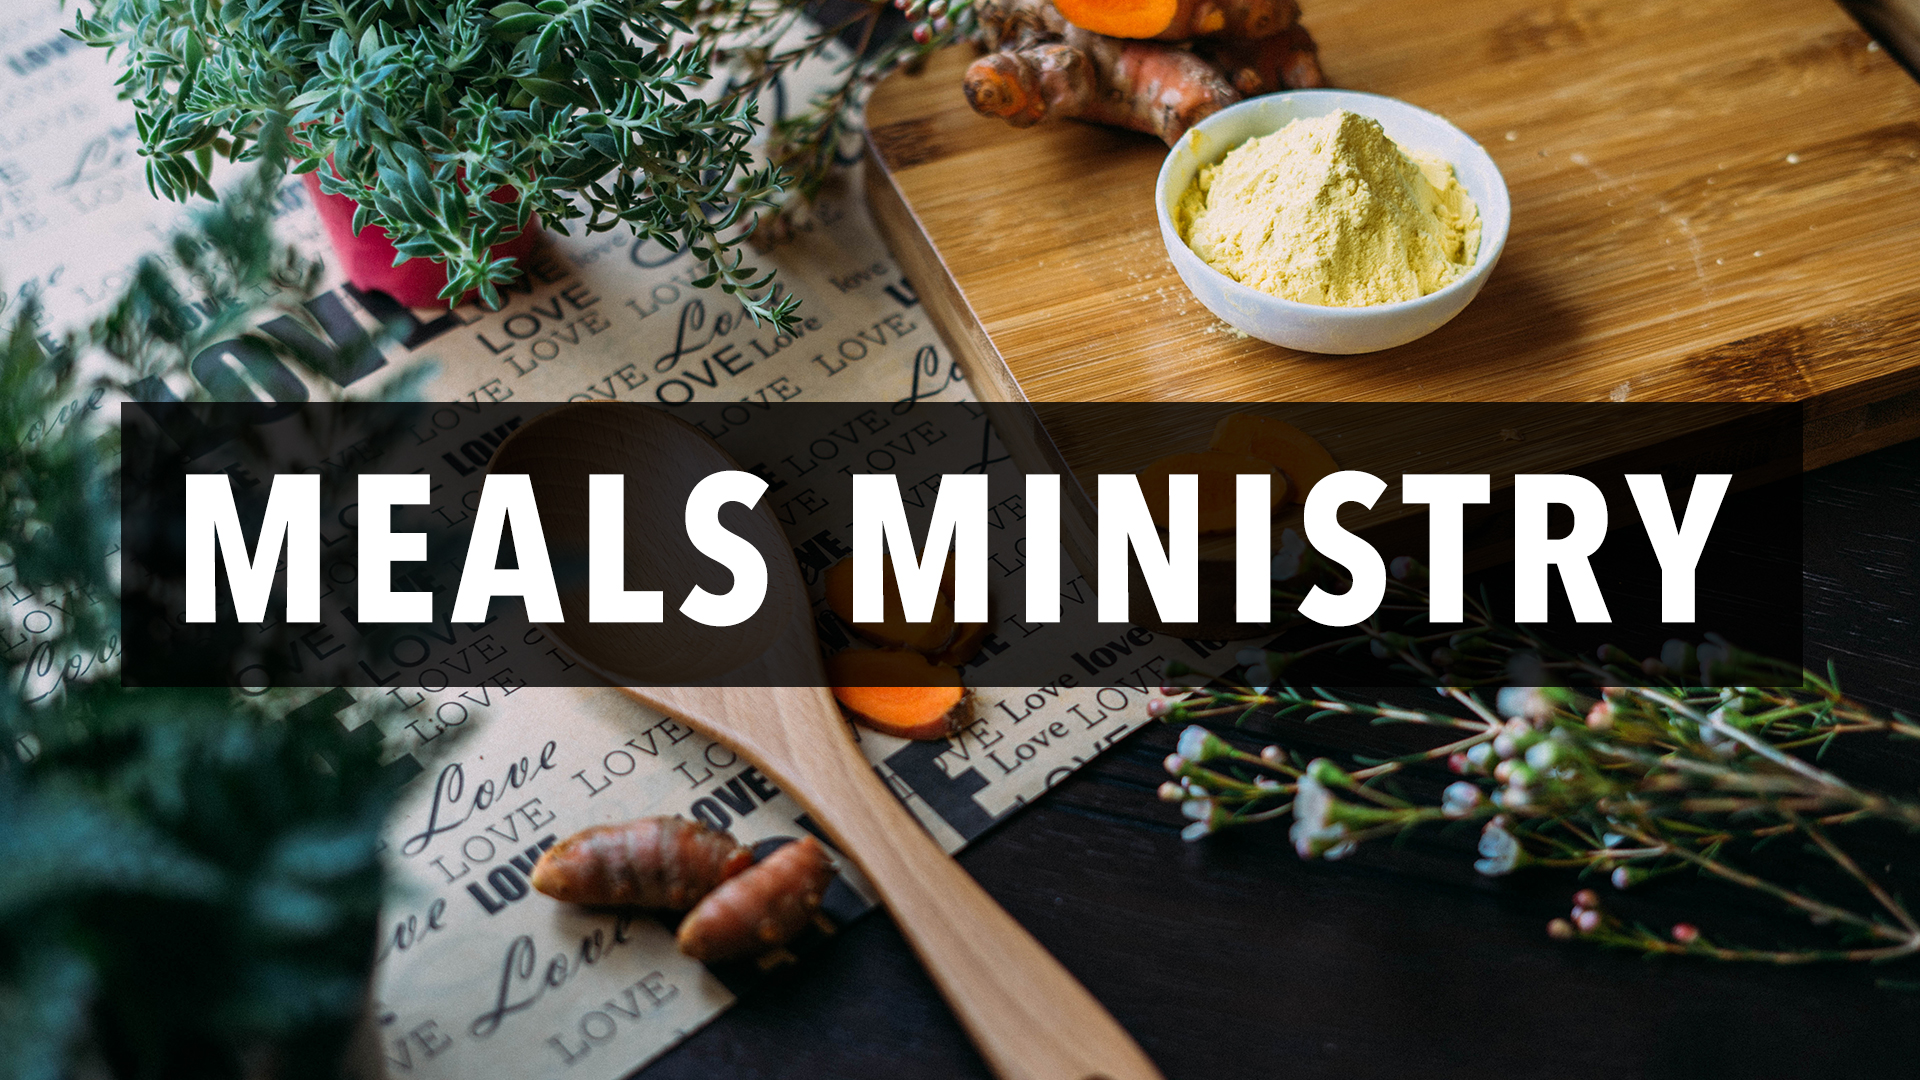 Meals-Ministry.jpg